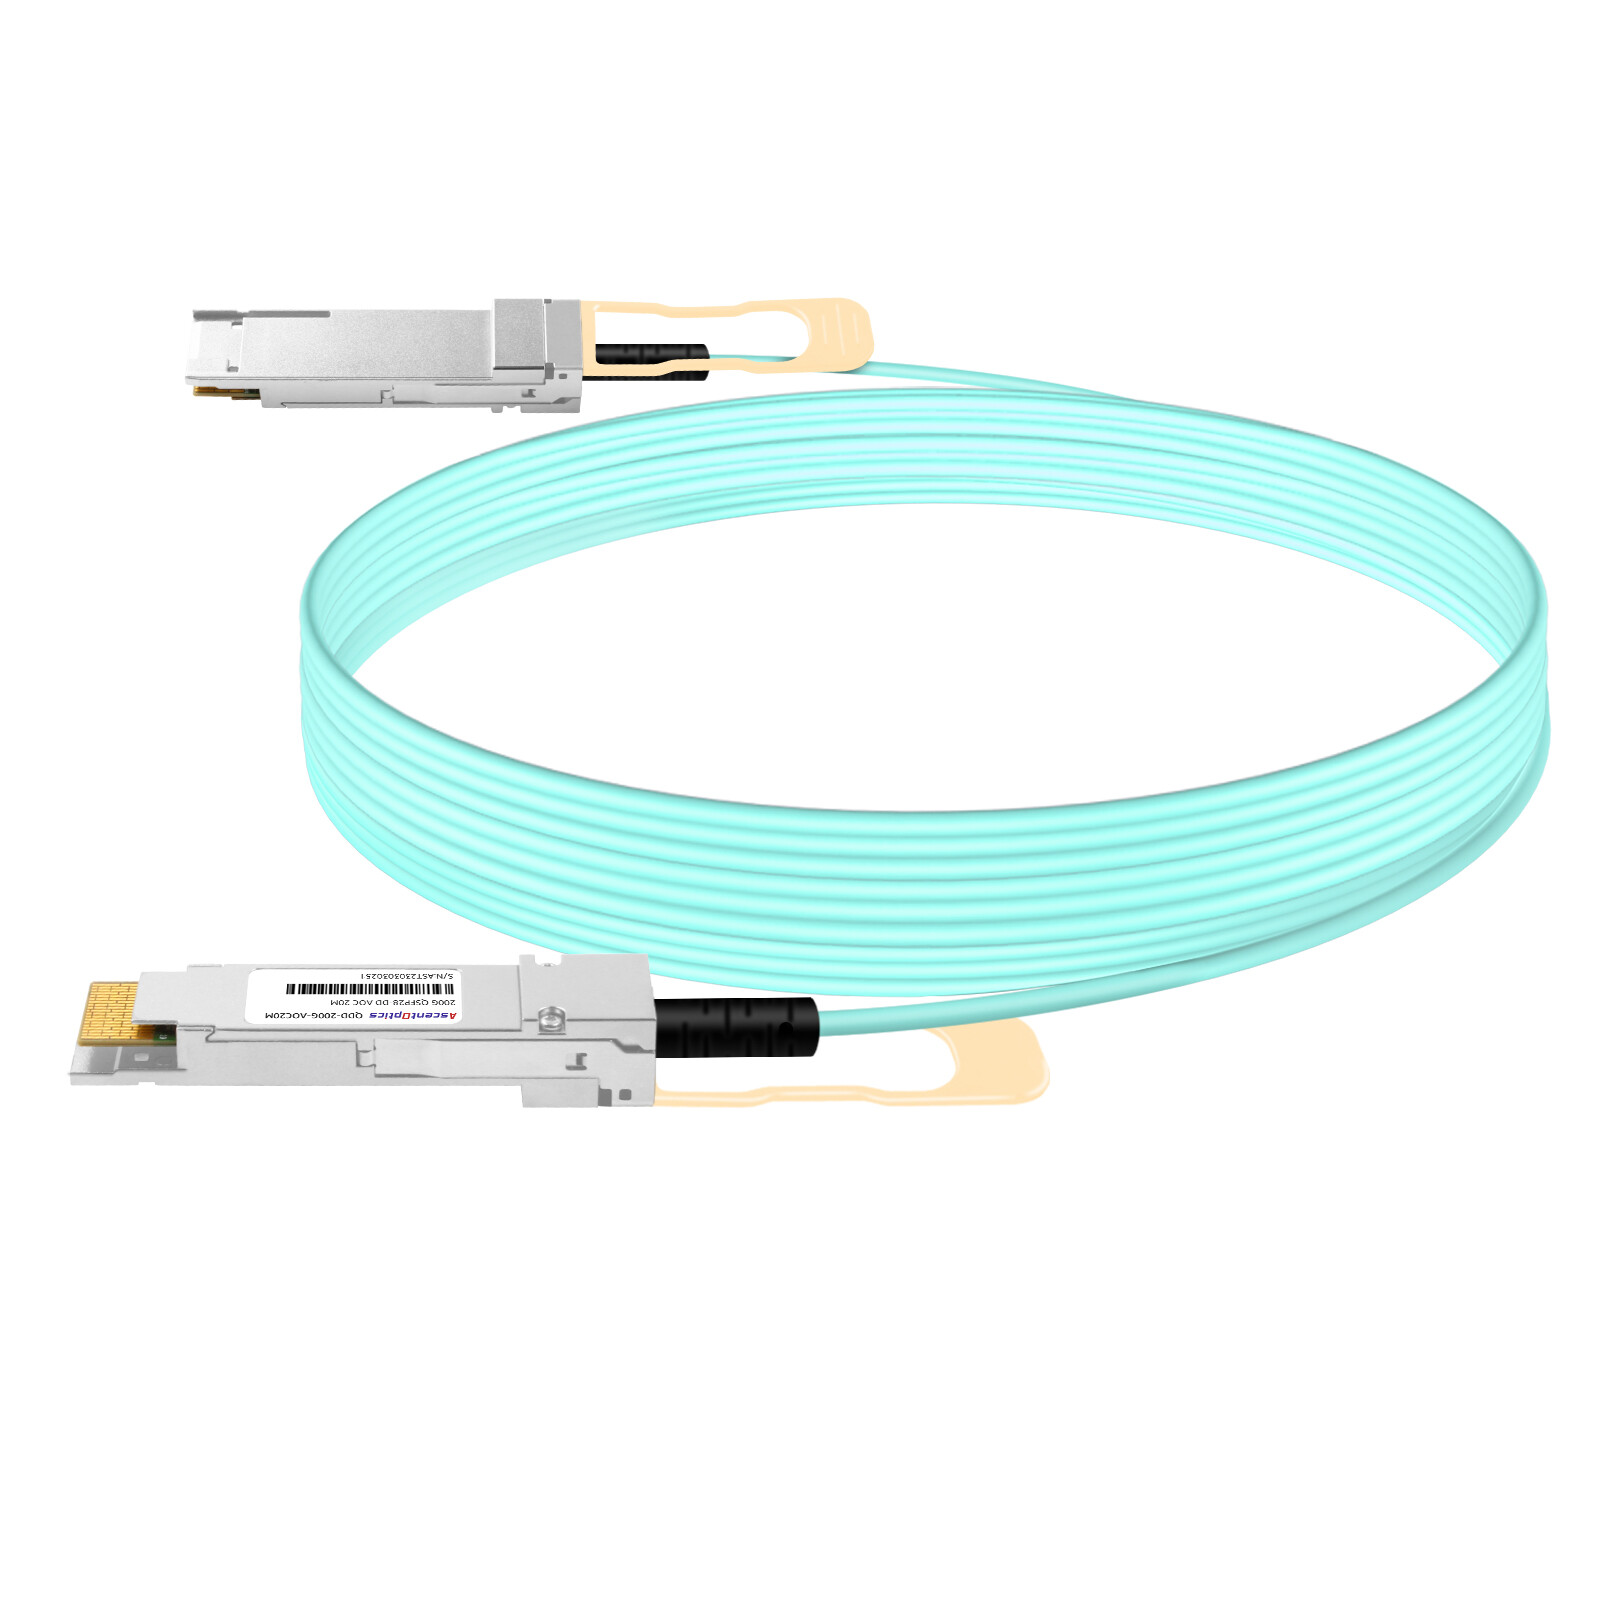 200G QSFP28-DD Active Optical Cable,20 Meters